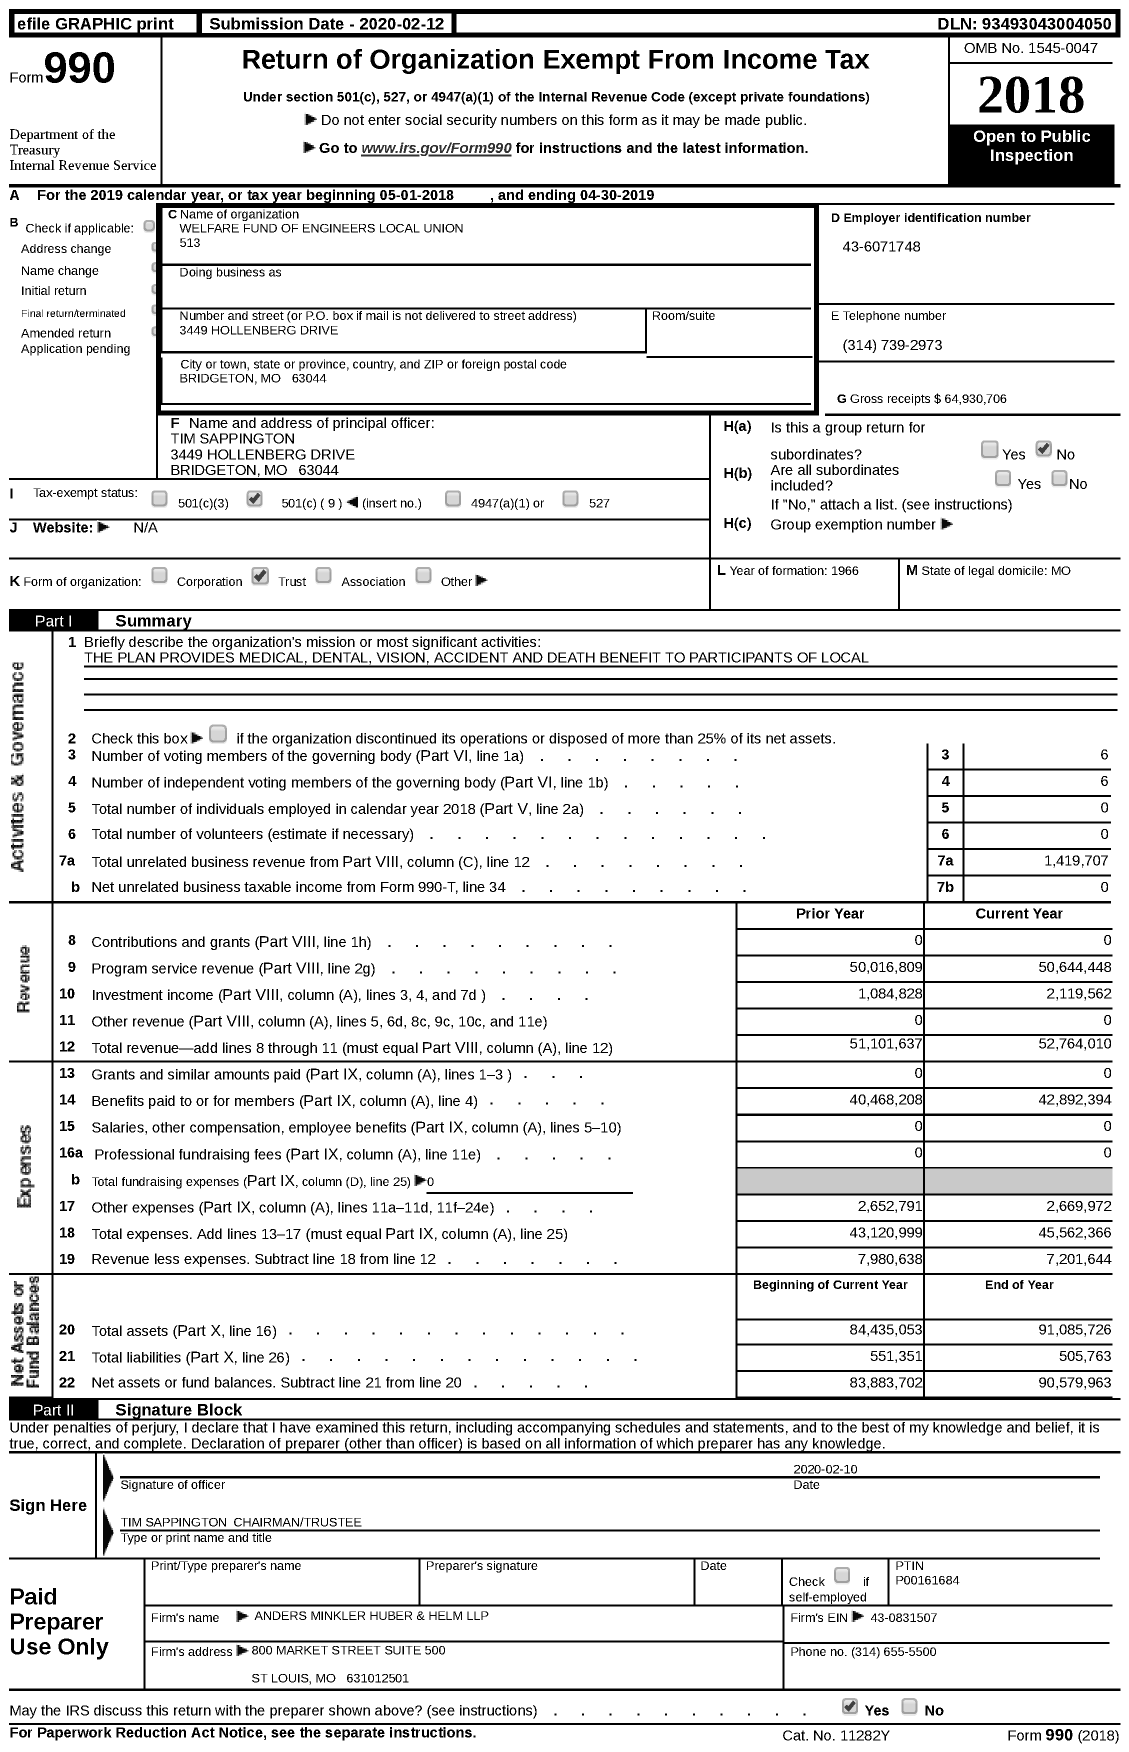 Image of first page of 2018 Form 990 for Welfare Fund of Engineers Local Union 513